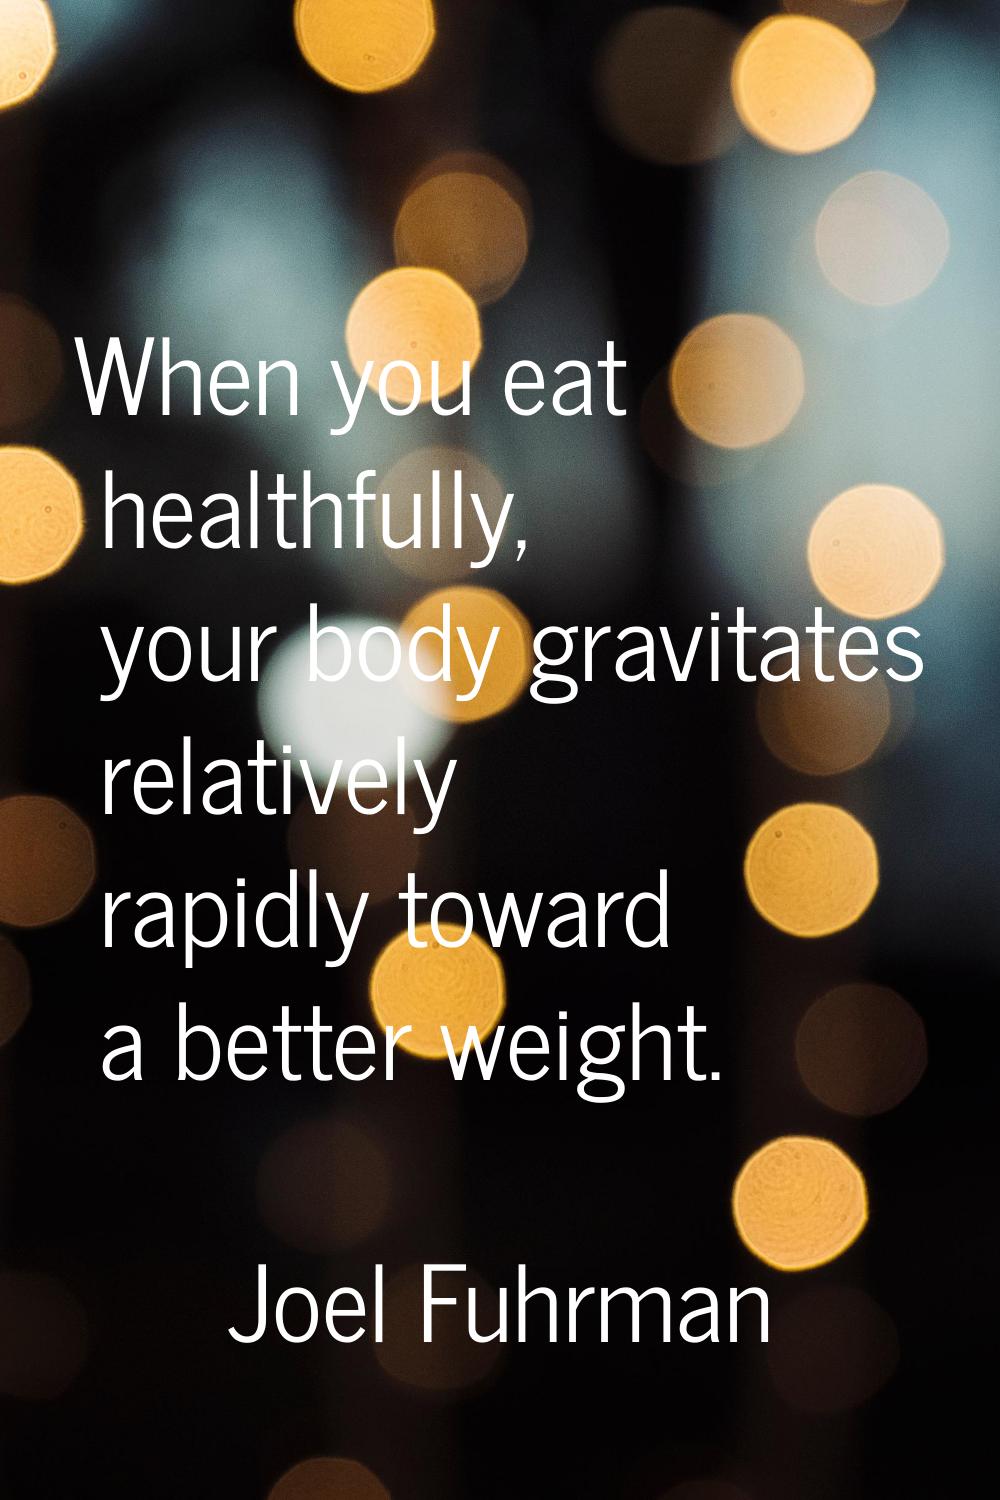 When you eat healthfully, your body gravitates relatively rapidly toward a better weight.